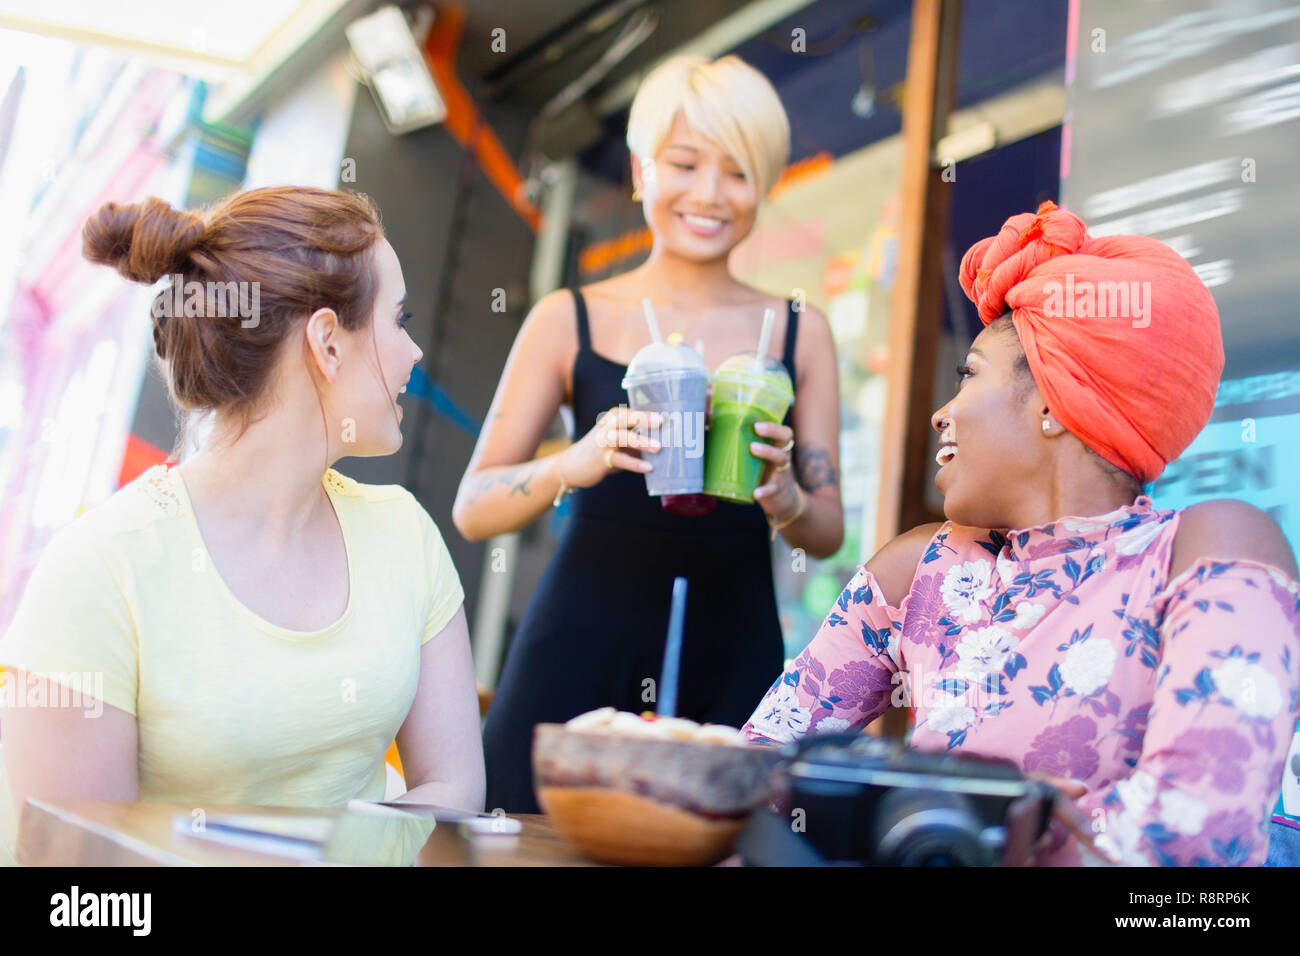 Waitress serving smoothies to women friends at sidewalk cafe Stock Photo